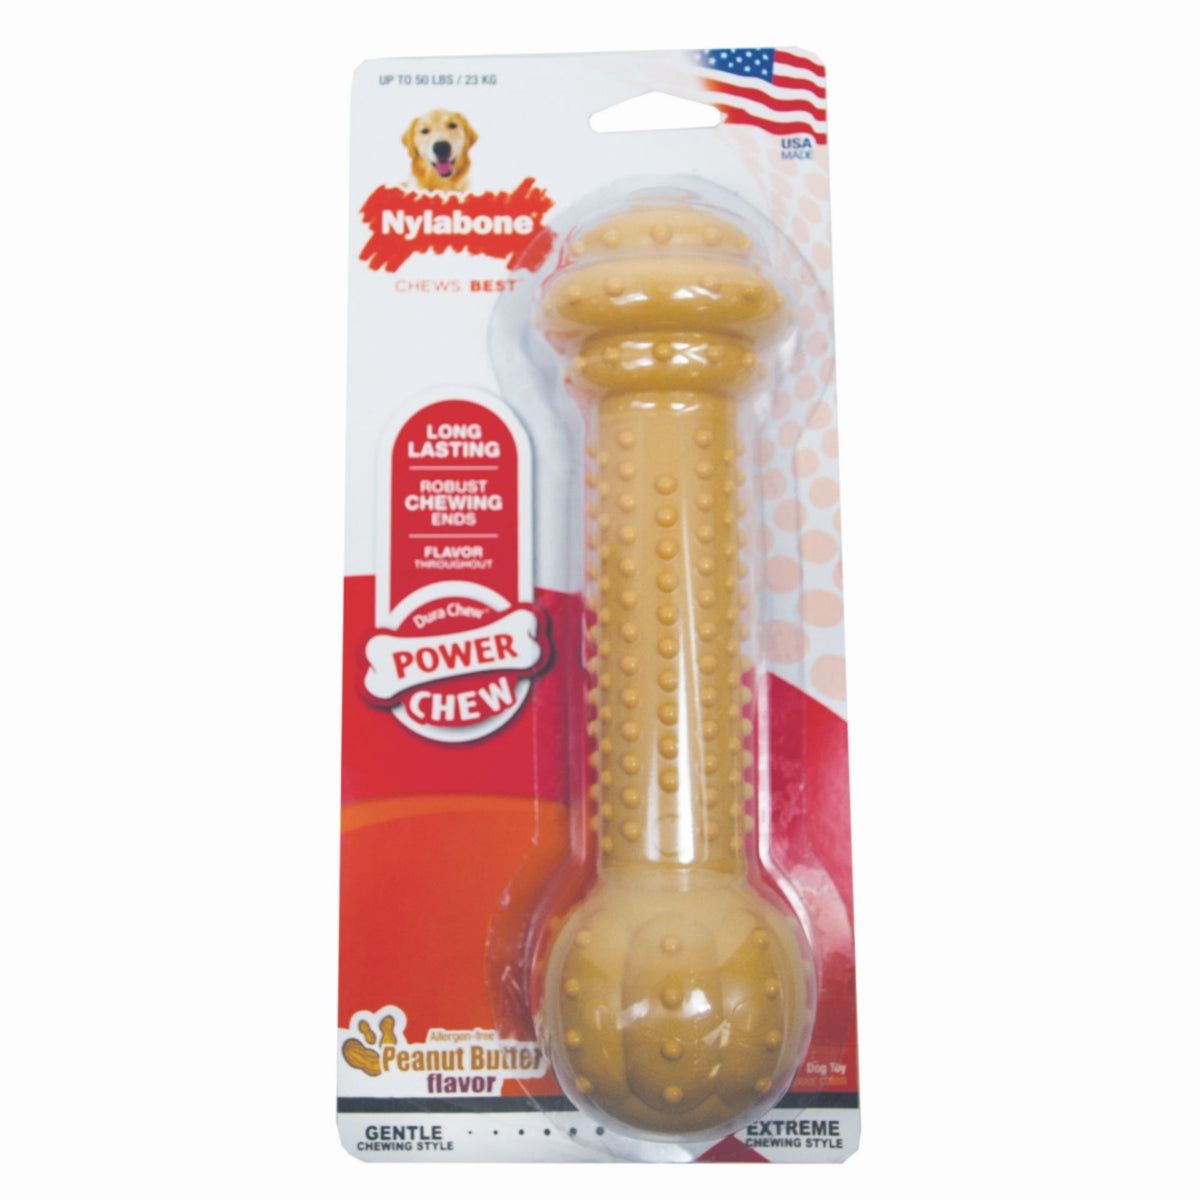 Nylabone - Dura Chew Giant Barbell Peanut Butter Flavor-Southern Agriculture